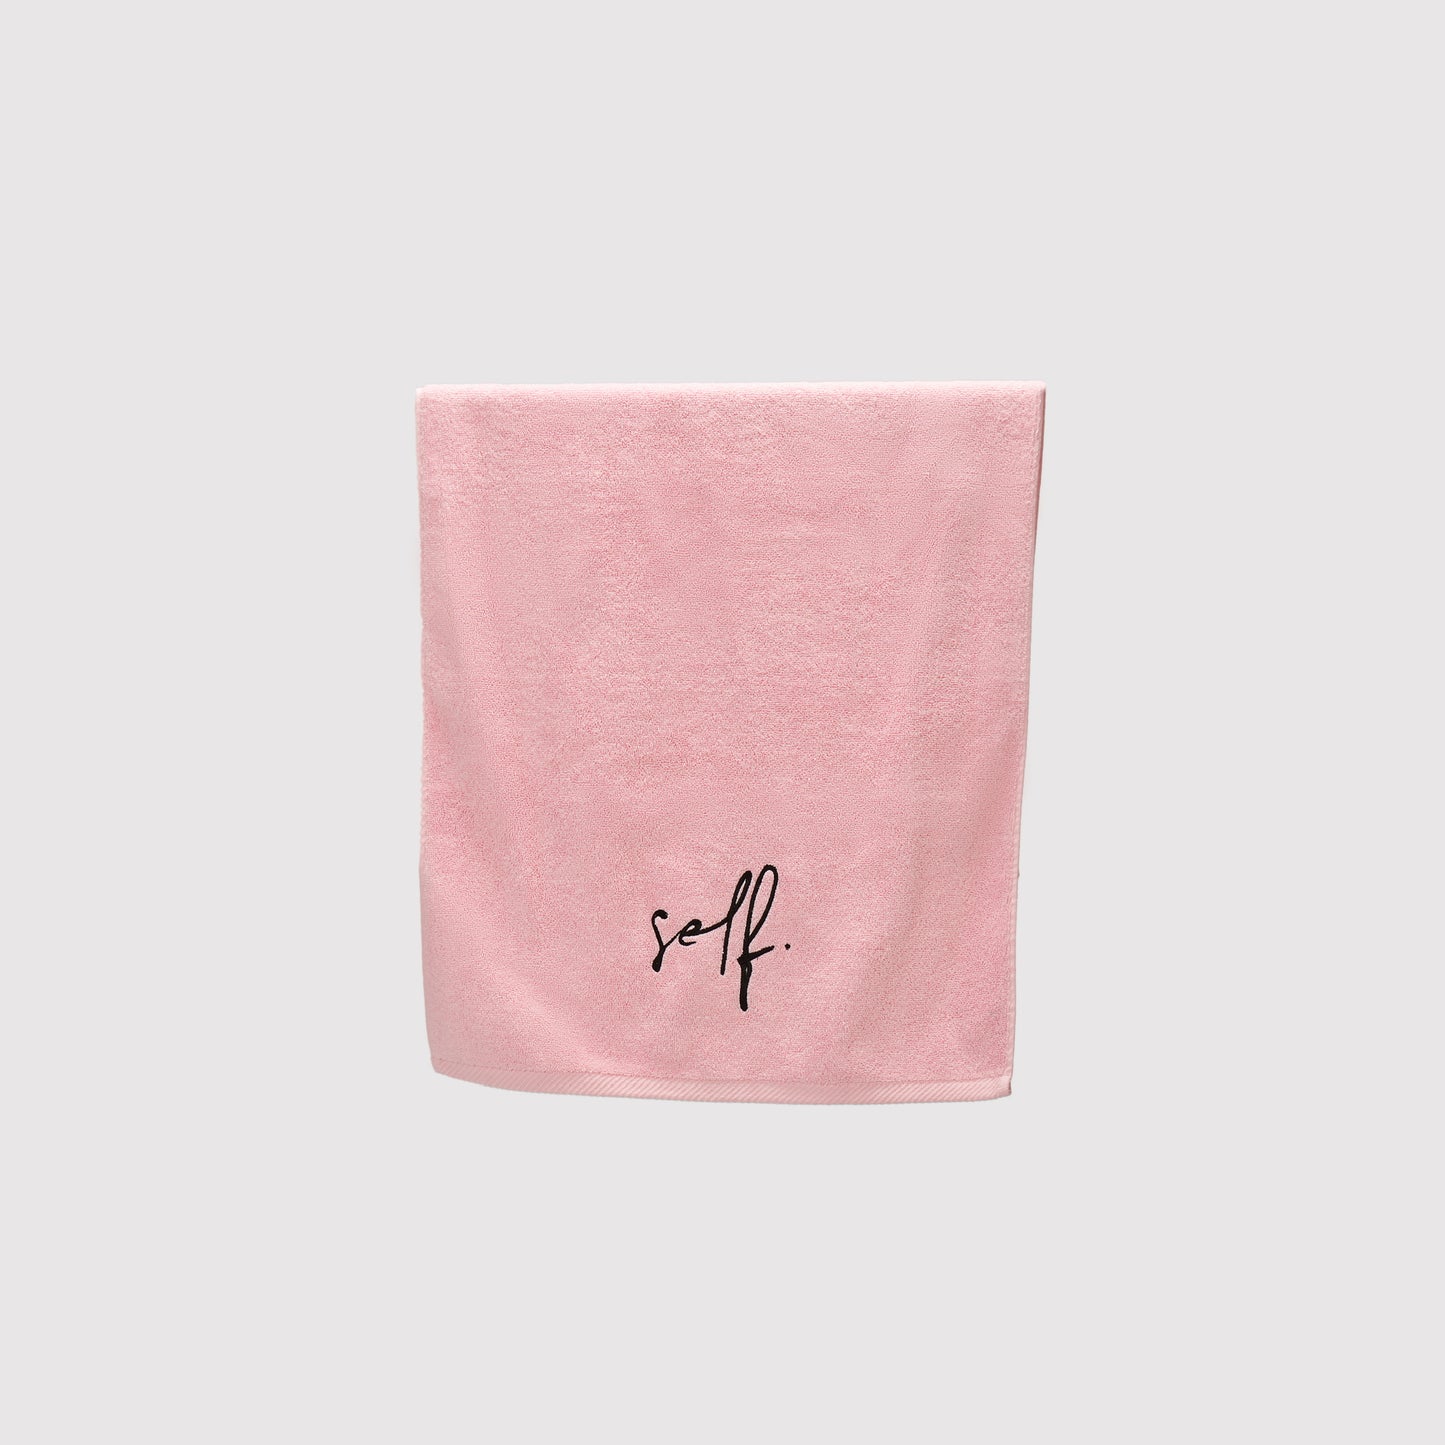 the towel – Self The Brand